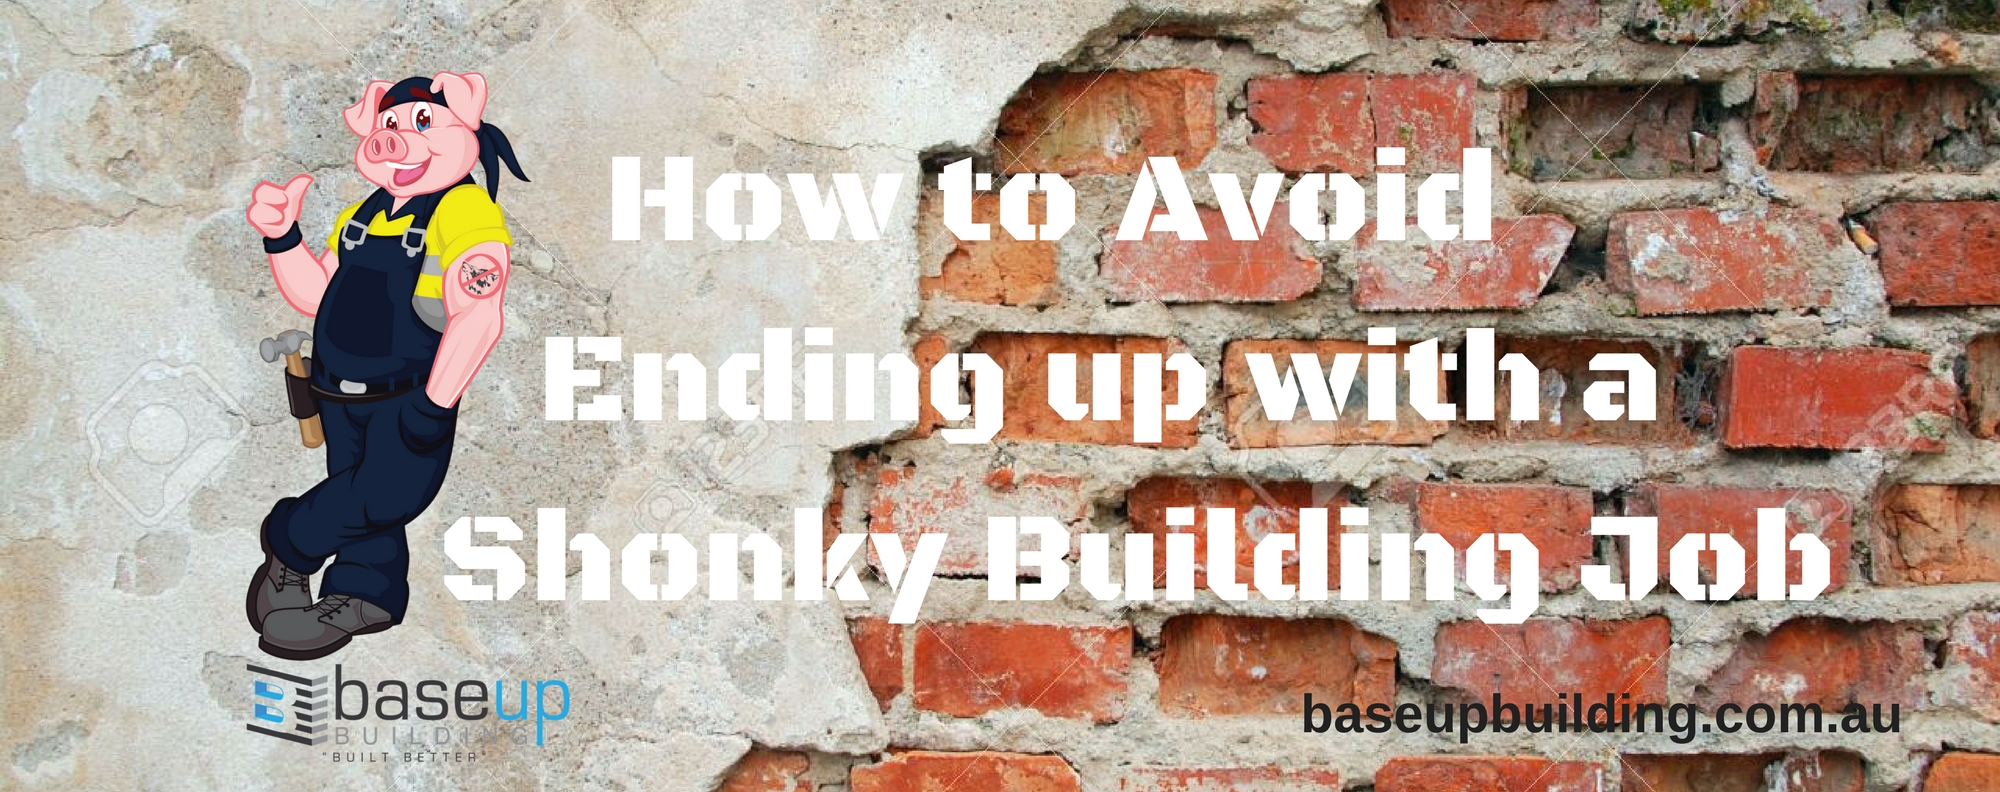 How to Avoid Getting a Shonky Building Job